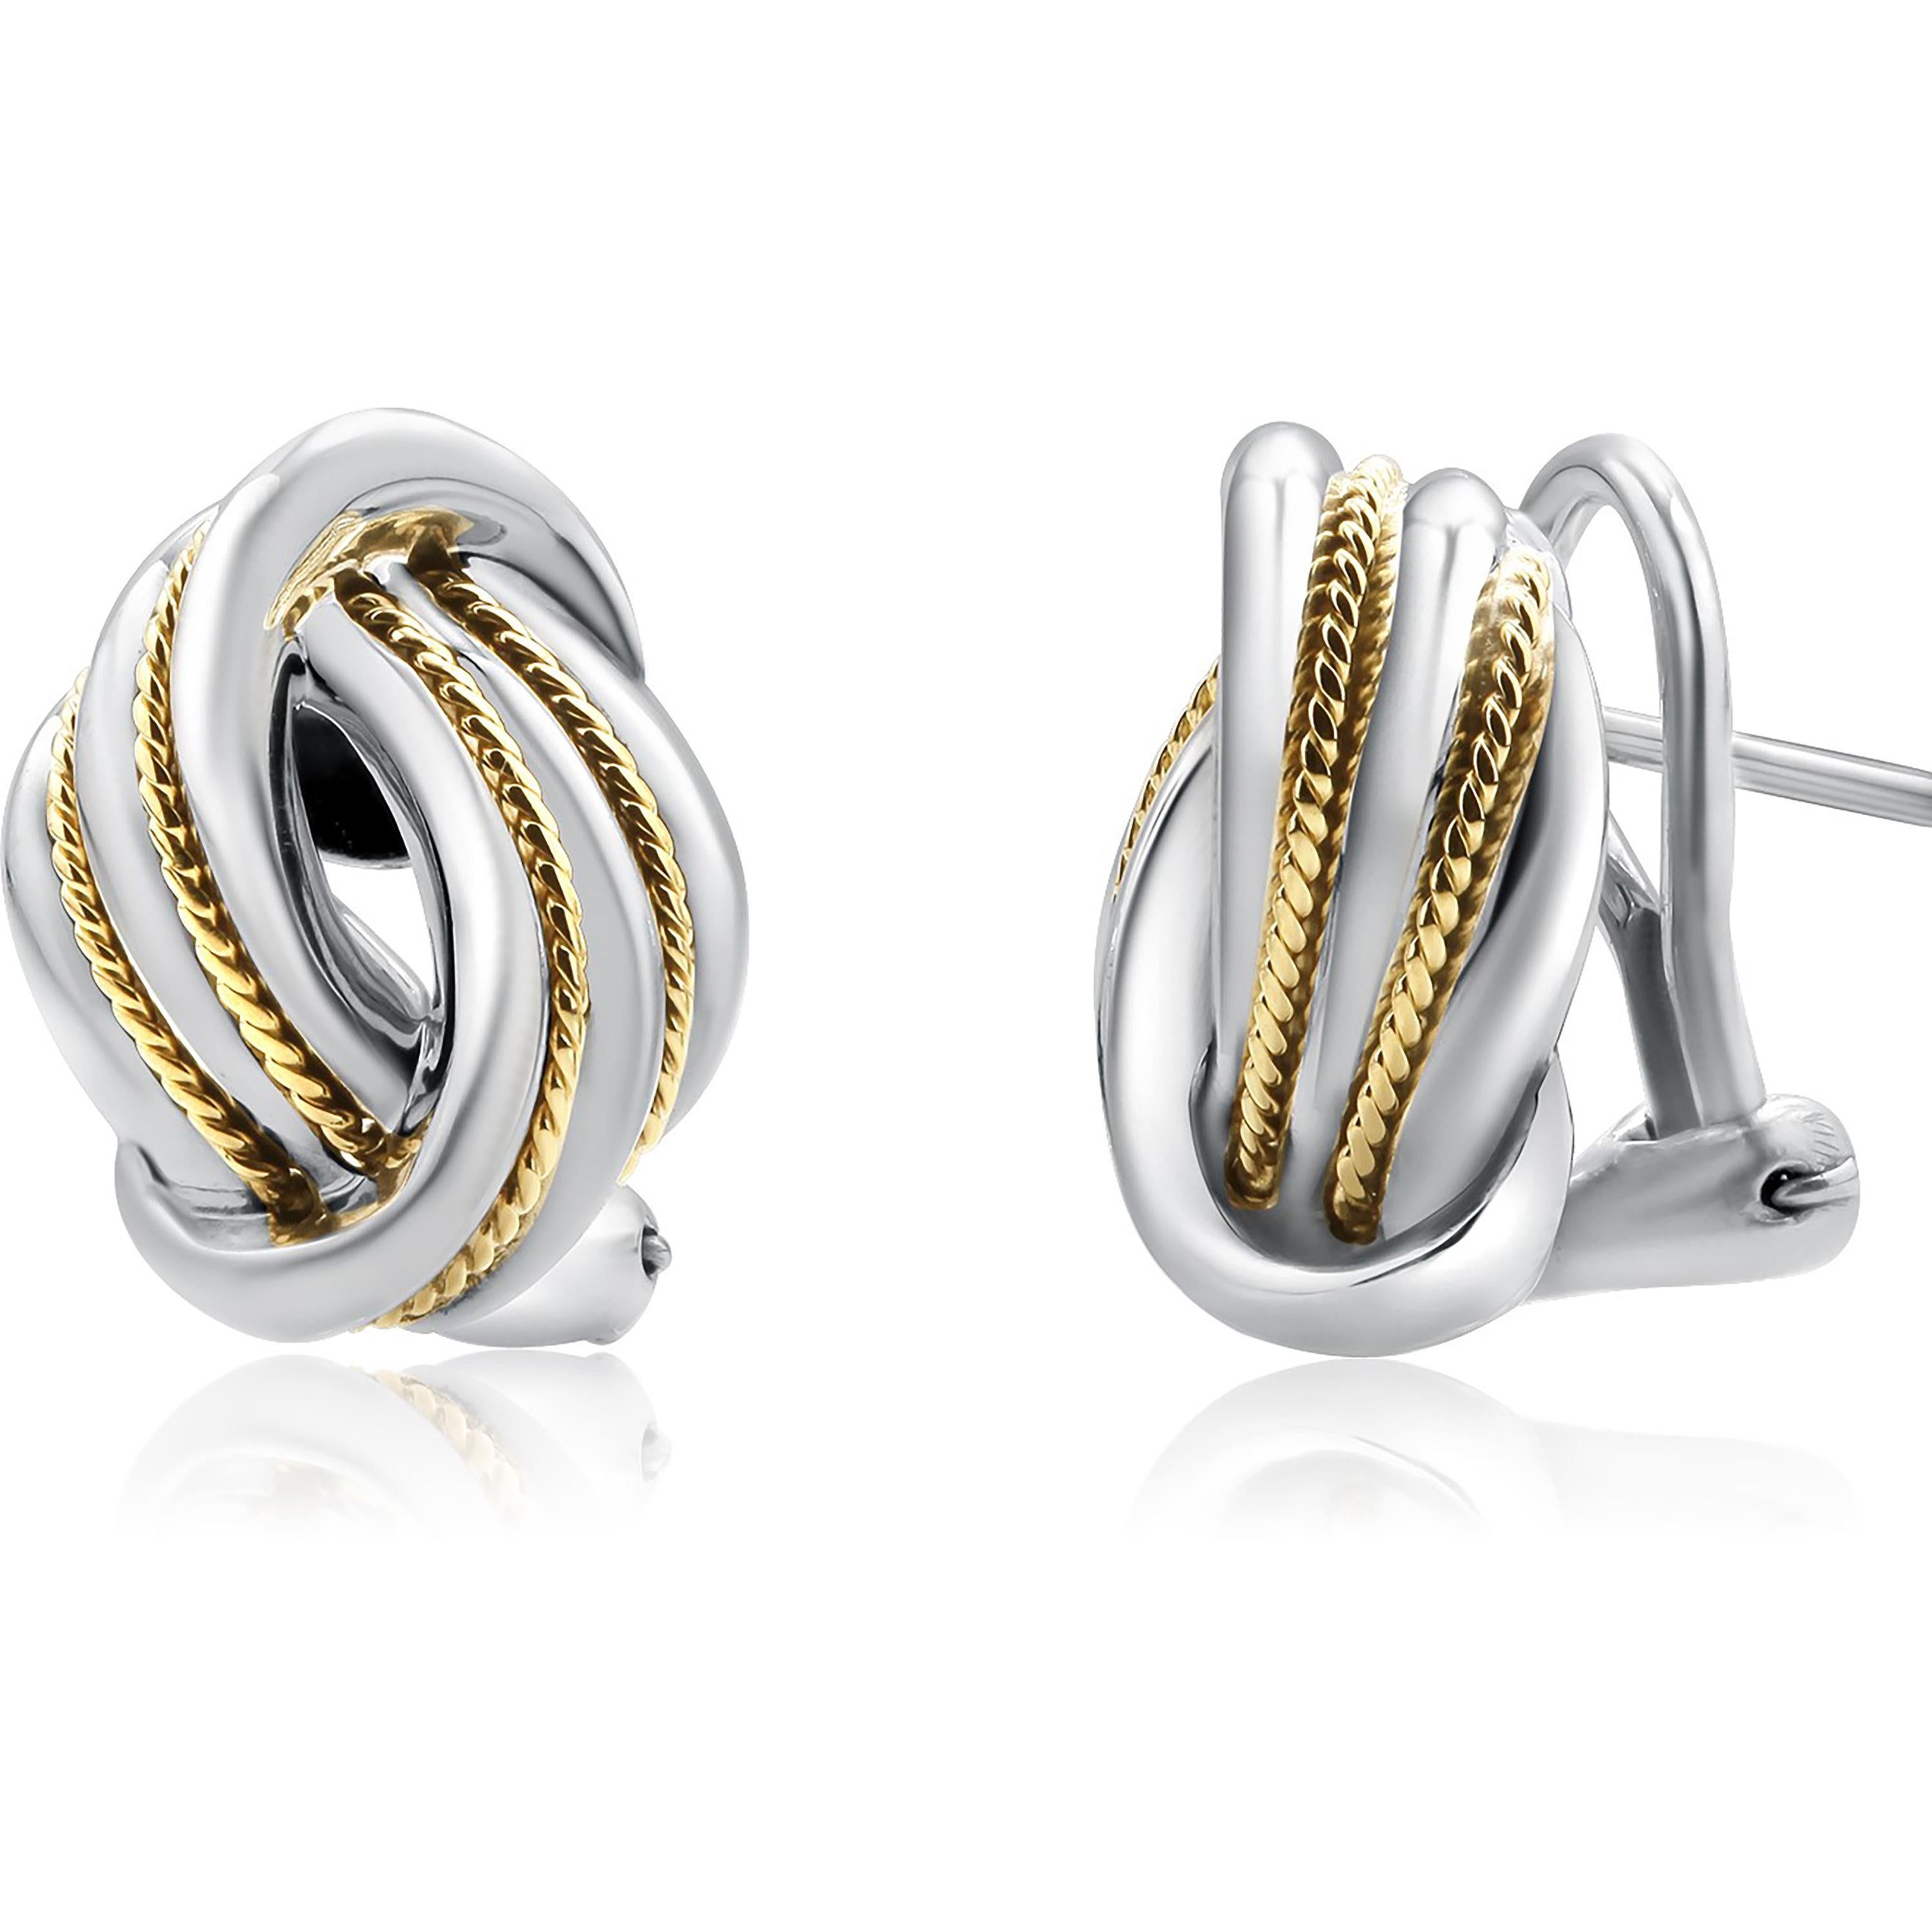 Introducing our exquisite Tiffany & Co Vintage 18 Karat Yellow Gold Sterling Silver Ribbed Earrings, a captivating addition to your jewelry collection. Crafted with the utmost precision and attention to detail, these earrings blend the warmth of